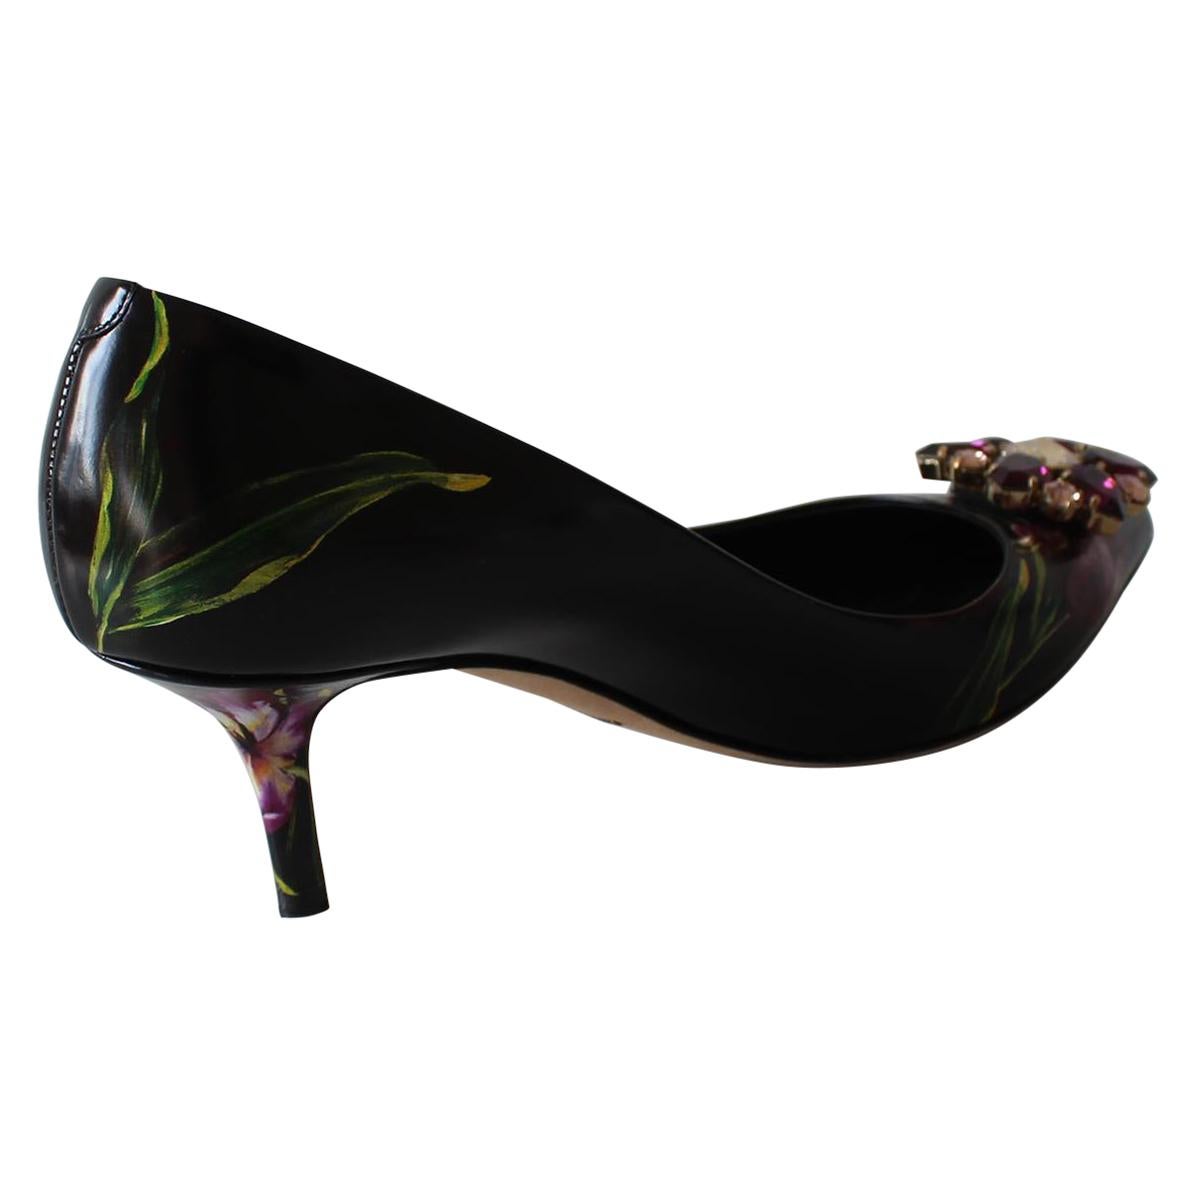 Amazing and super chic Dolce & Gabbana décolleté
Leather
Black color
Violet tulips print
Crystal jewel on the tip
Heel height cm 6 (2.36 inches)
Original price € 695
With box
Worldwd express shipping included in the price !